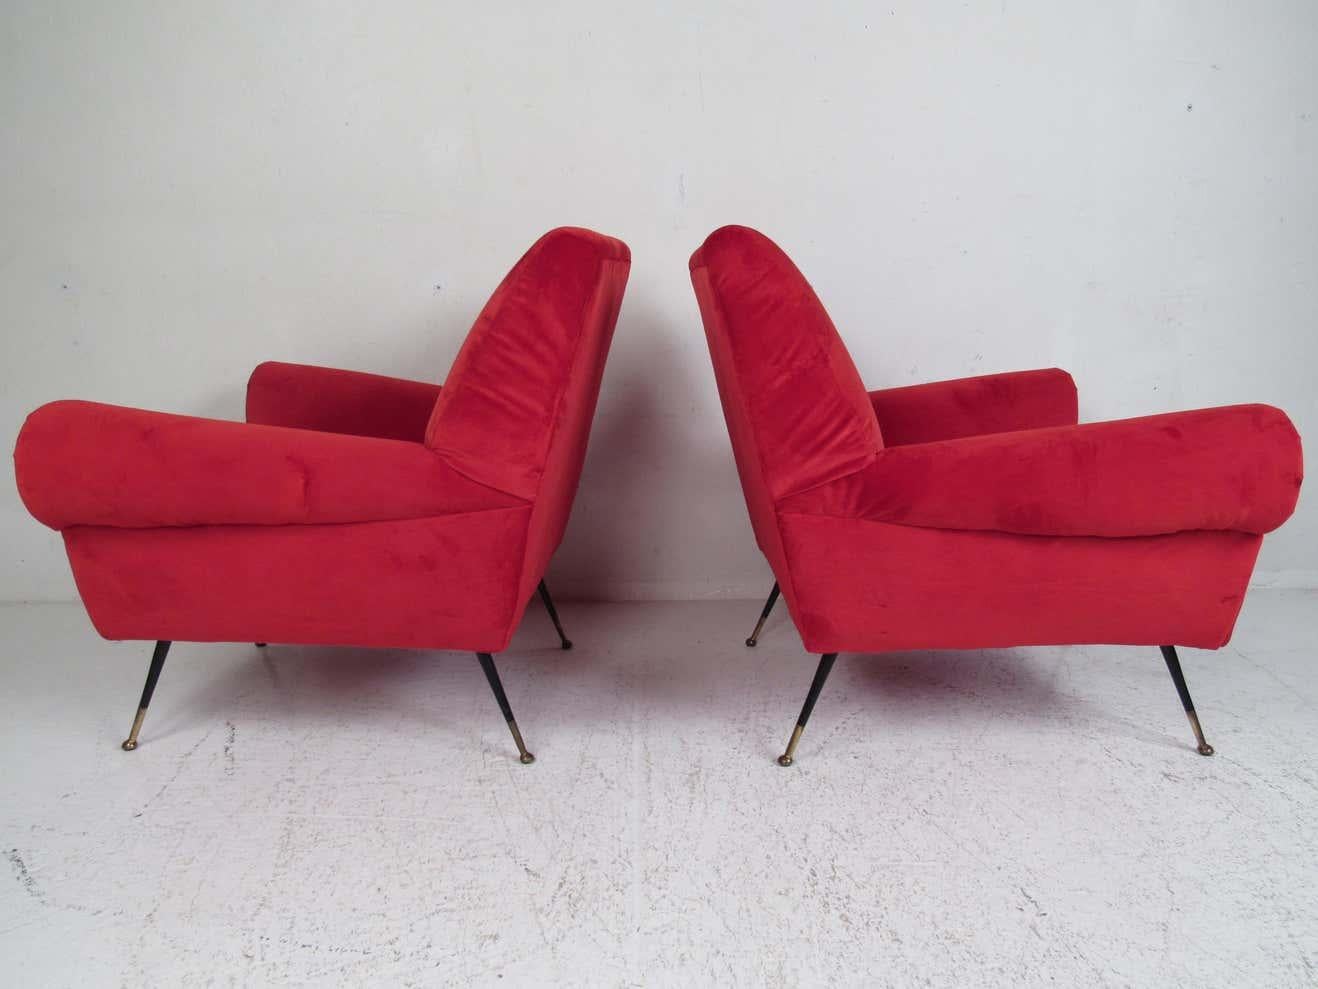 This beautiful pair of vintage modern lounge chairs feature thick padded seating covered in elegant ruby red upholstery. A sleek and comfortable low sitting design that has splayed metal legs with brass feet. The overstuffed armrests and wide